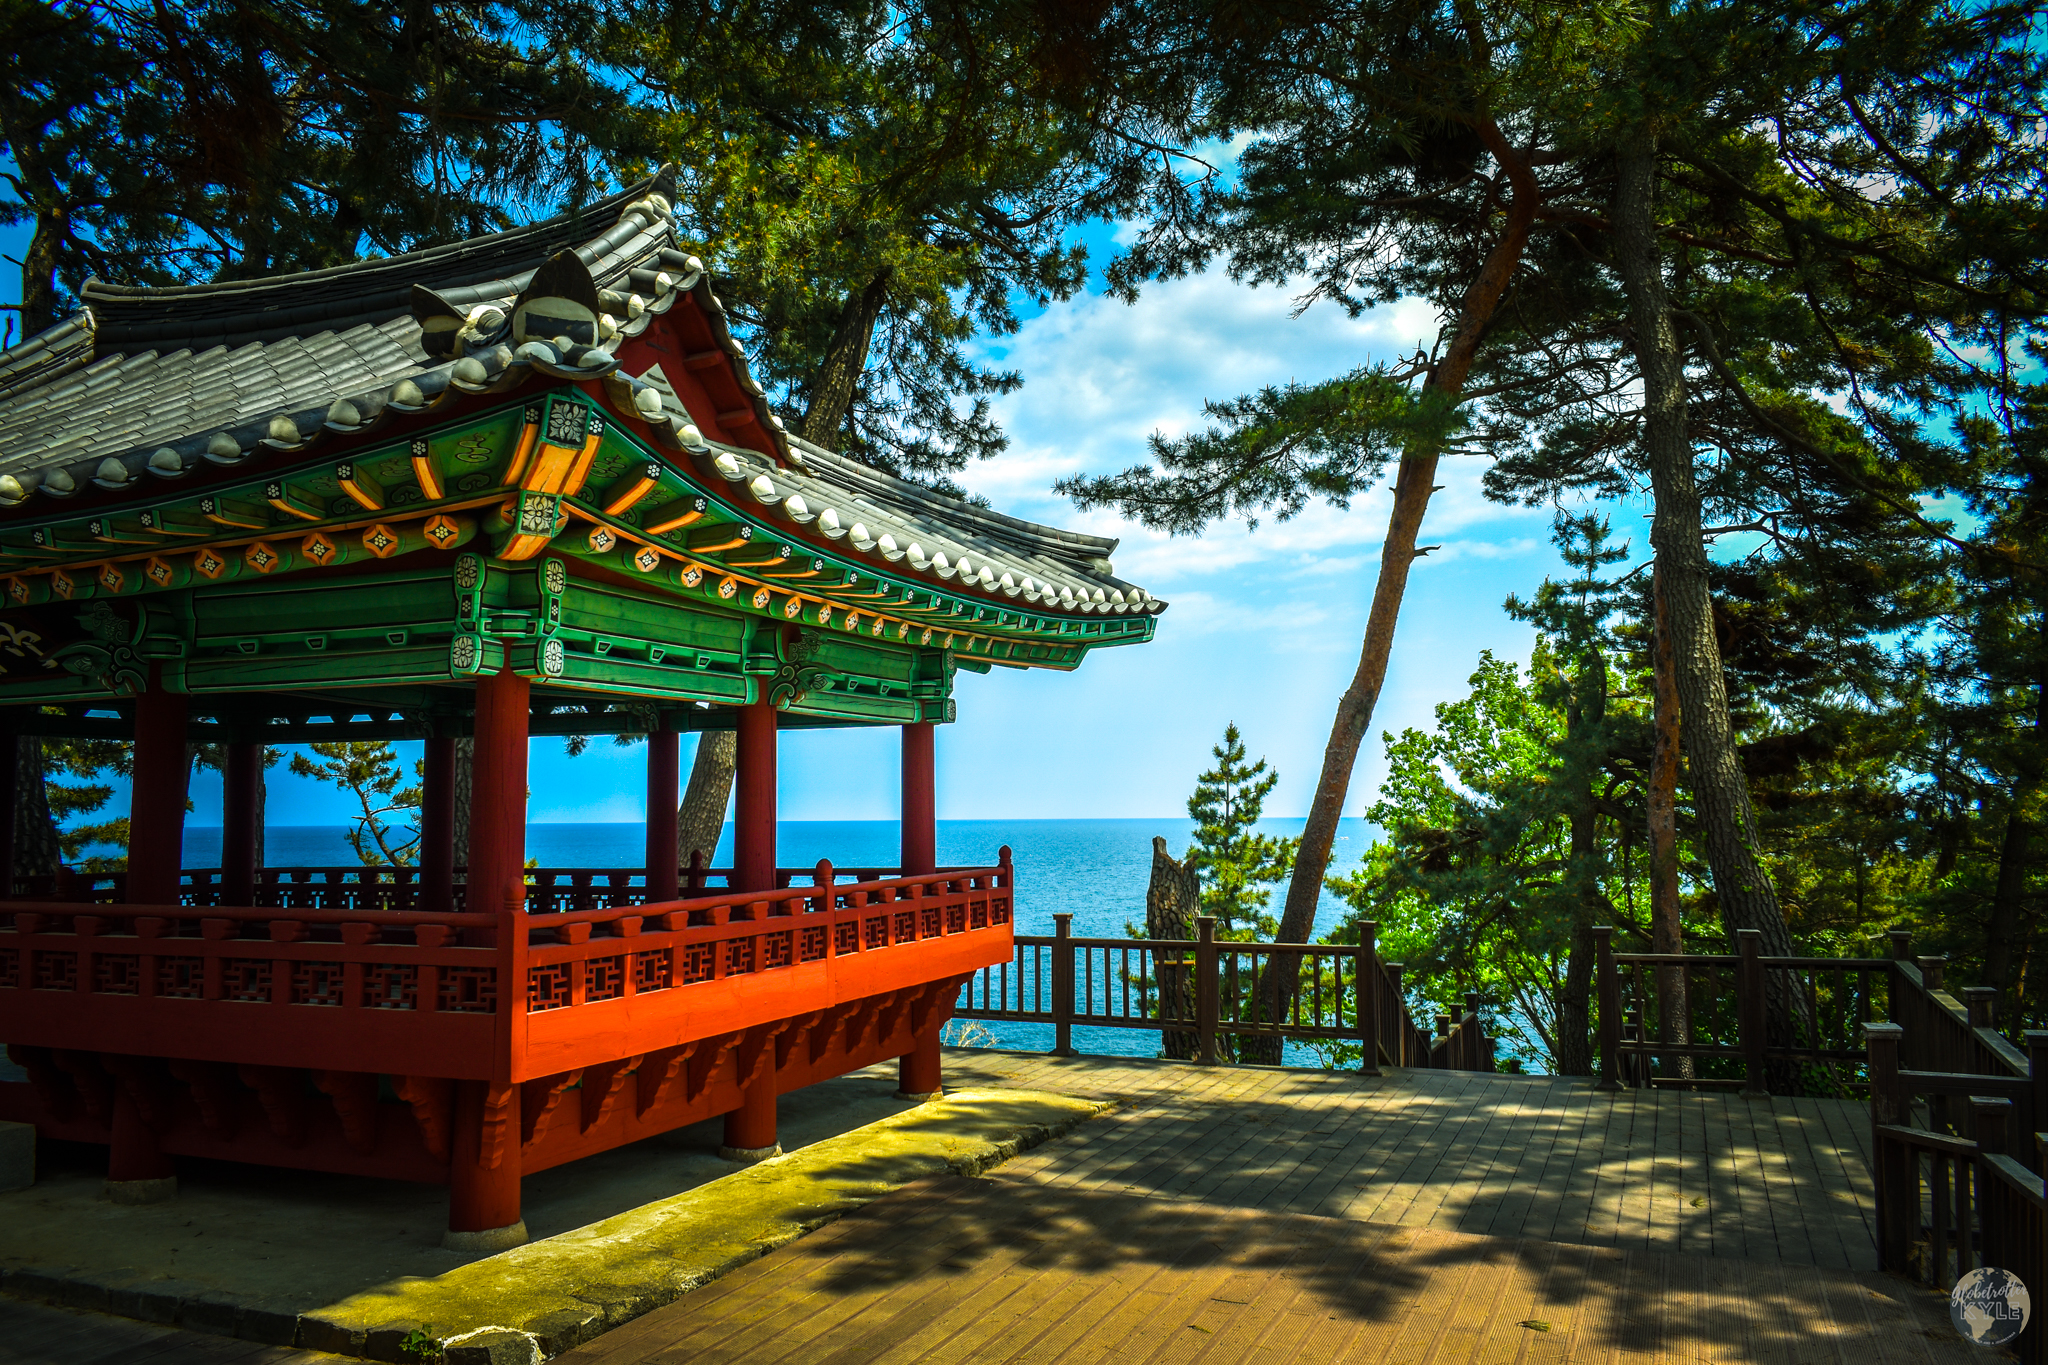 The brightly colored Jugdojeong Pavilion Korean pavilion rests under tall pine trees with the ocean in the background 